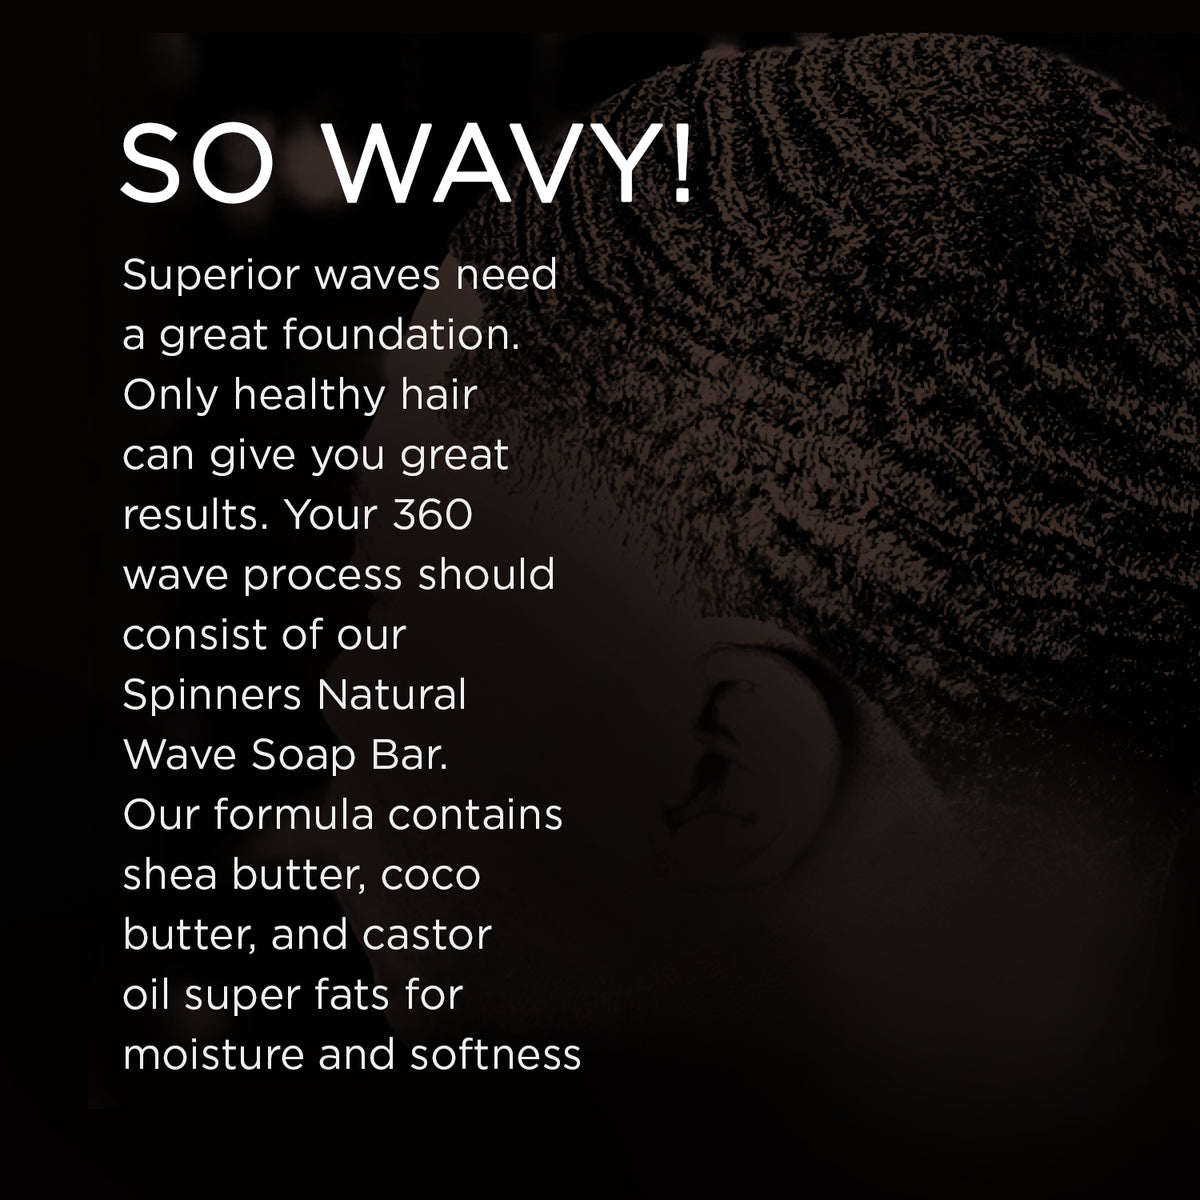 Spinners All-Natural 360 Wave Soap Bar with Jamaican Castor Oil - Xotics By  Curtis Smith